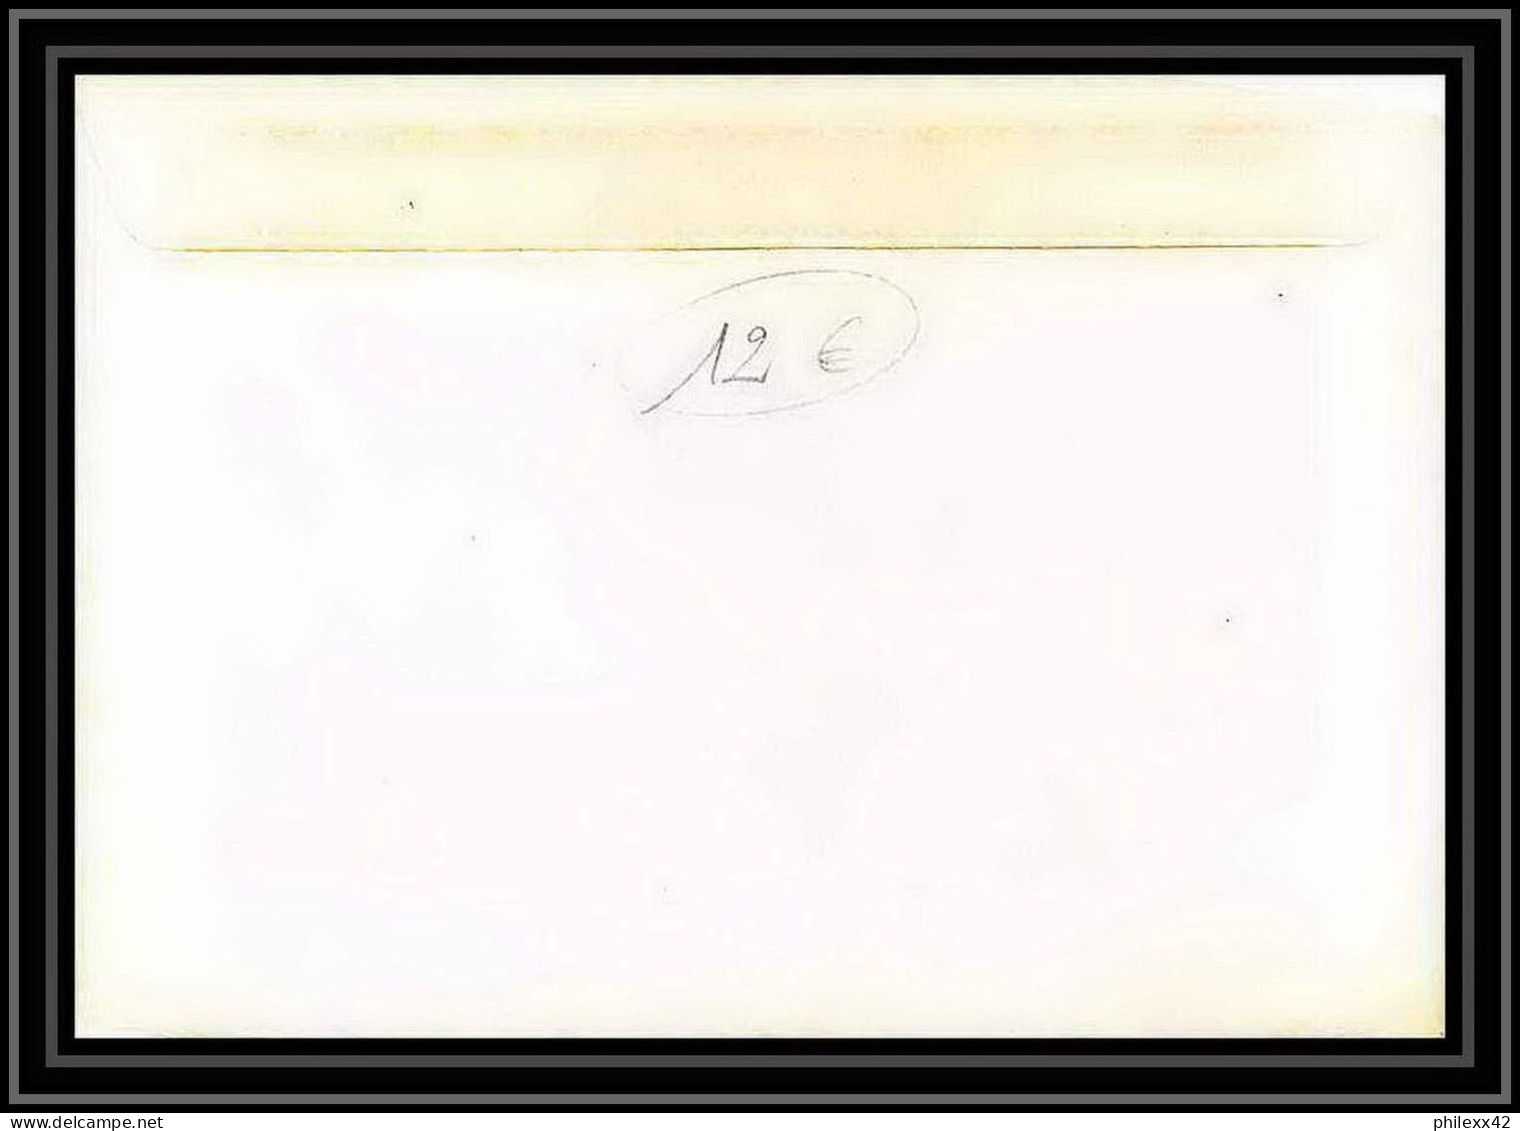 1536 Navire Austral 14/12/1984 TAAF Antarctic Terres Australes Lettre (cover) - Antarktis-Expeditionen